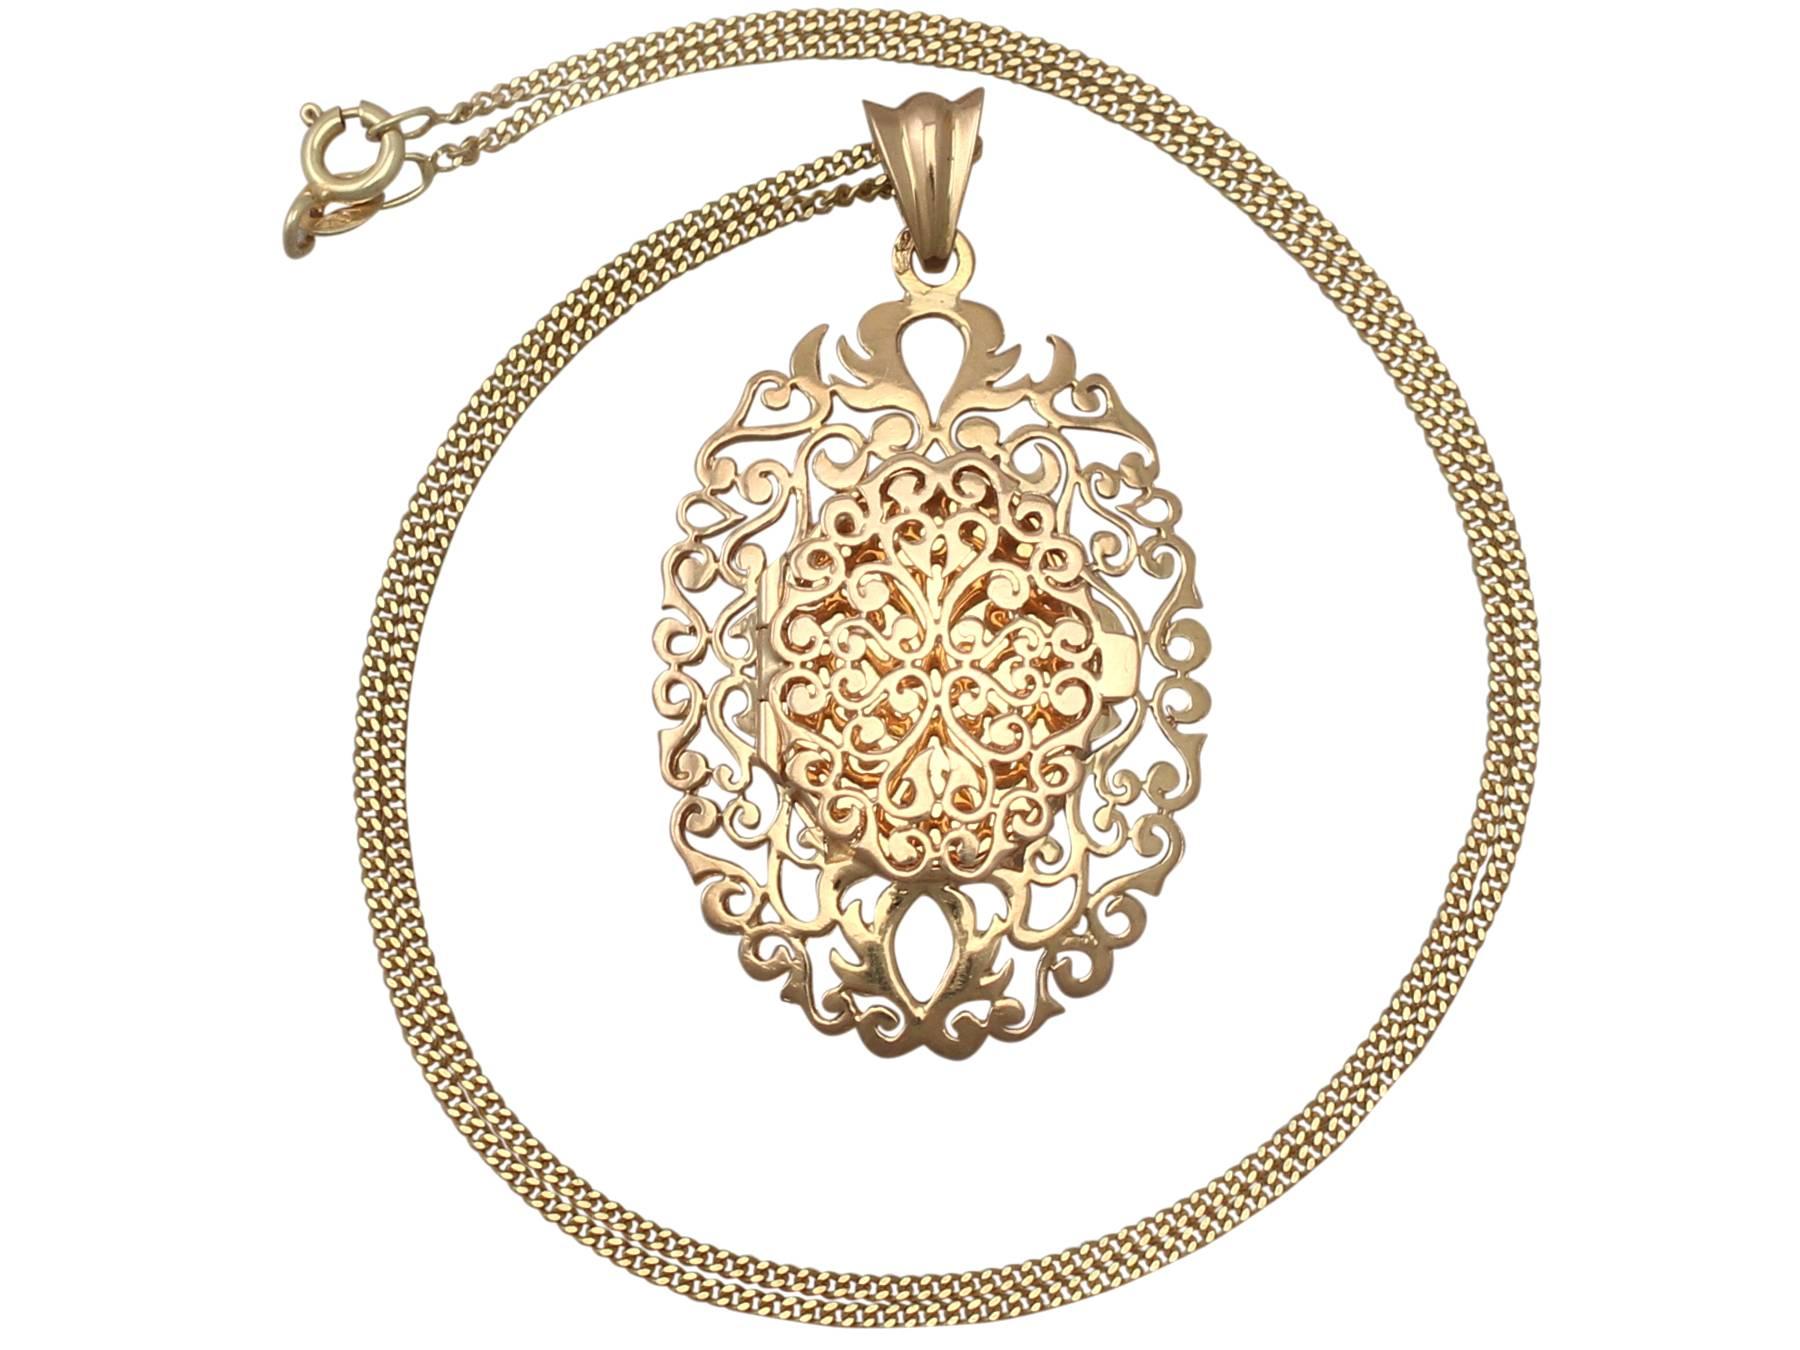 A fine and impressive vintage 18 karat yellow gold locket; part of our vintage jewelry and estate jewelry collections

This fine and impressive vintage locket pendant has been crafted in 18k yellow gold.

The pendant has an oval shaped filigree